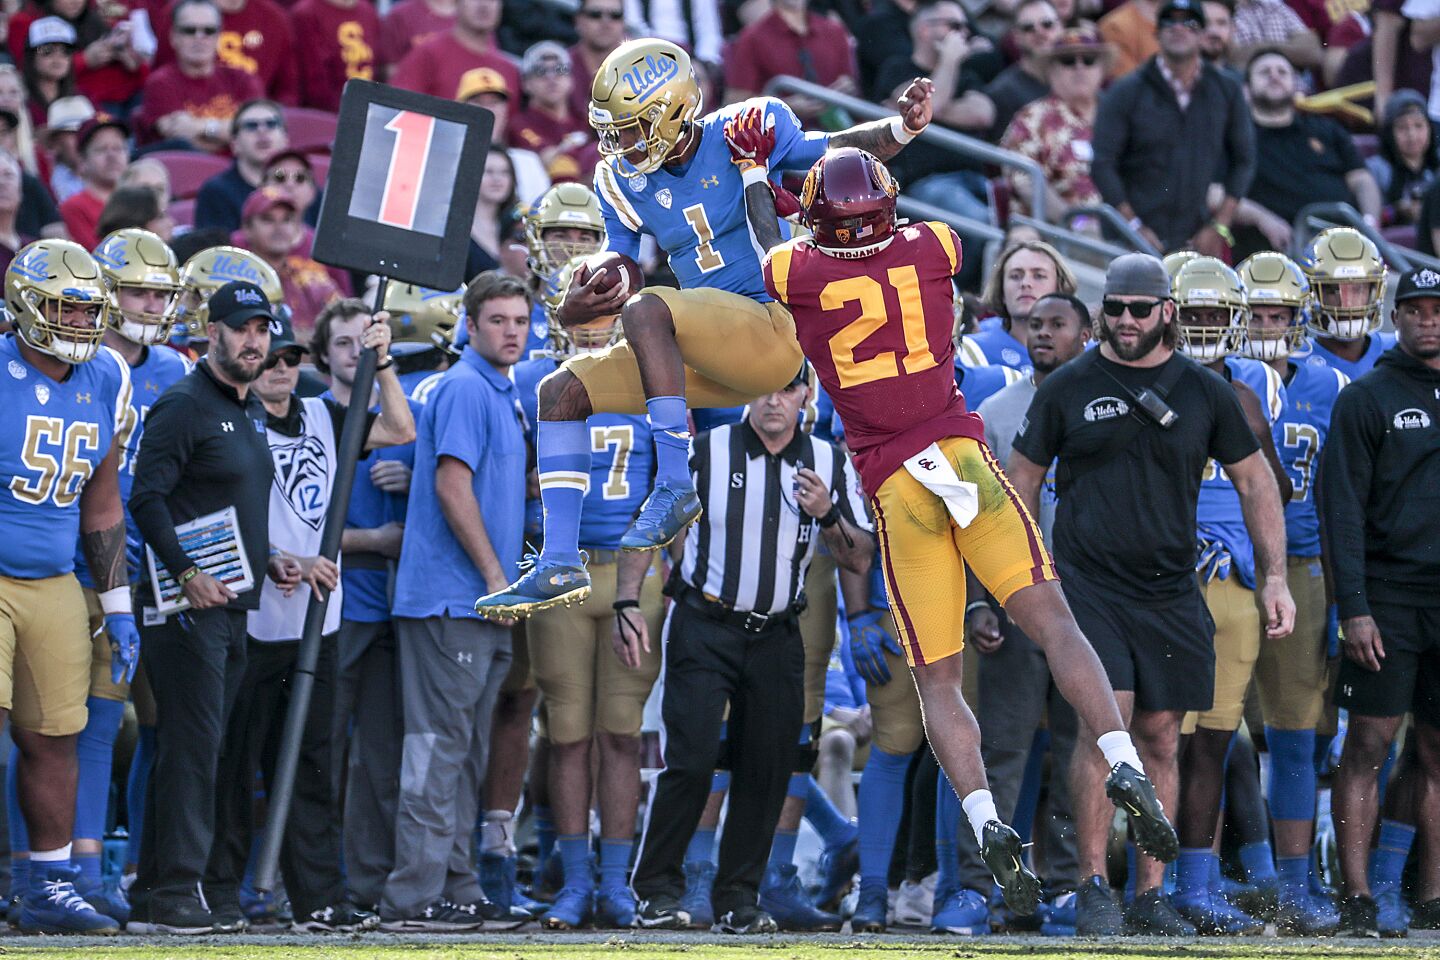 UCLA quarterback Dorian Thompson-Robinson (1) is shoved out of bounds by USC cornerback Olaijah Griffin (2) during first half action at the Coliseum on Saturday.